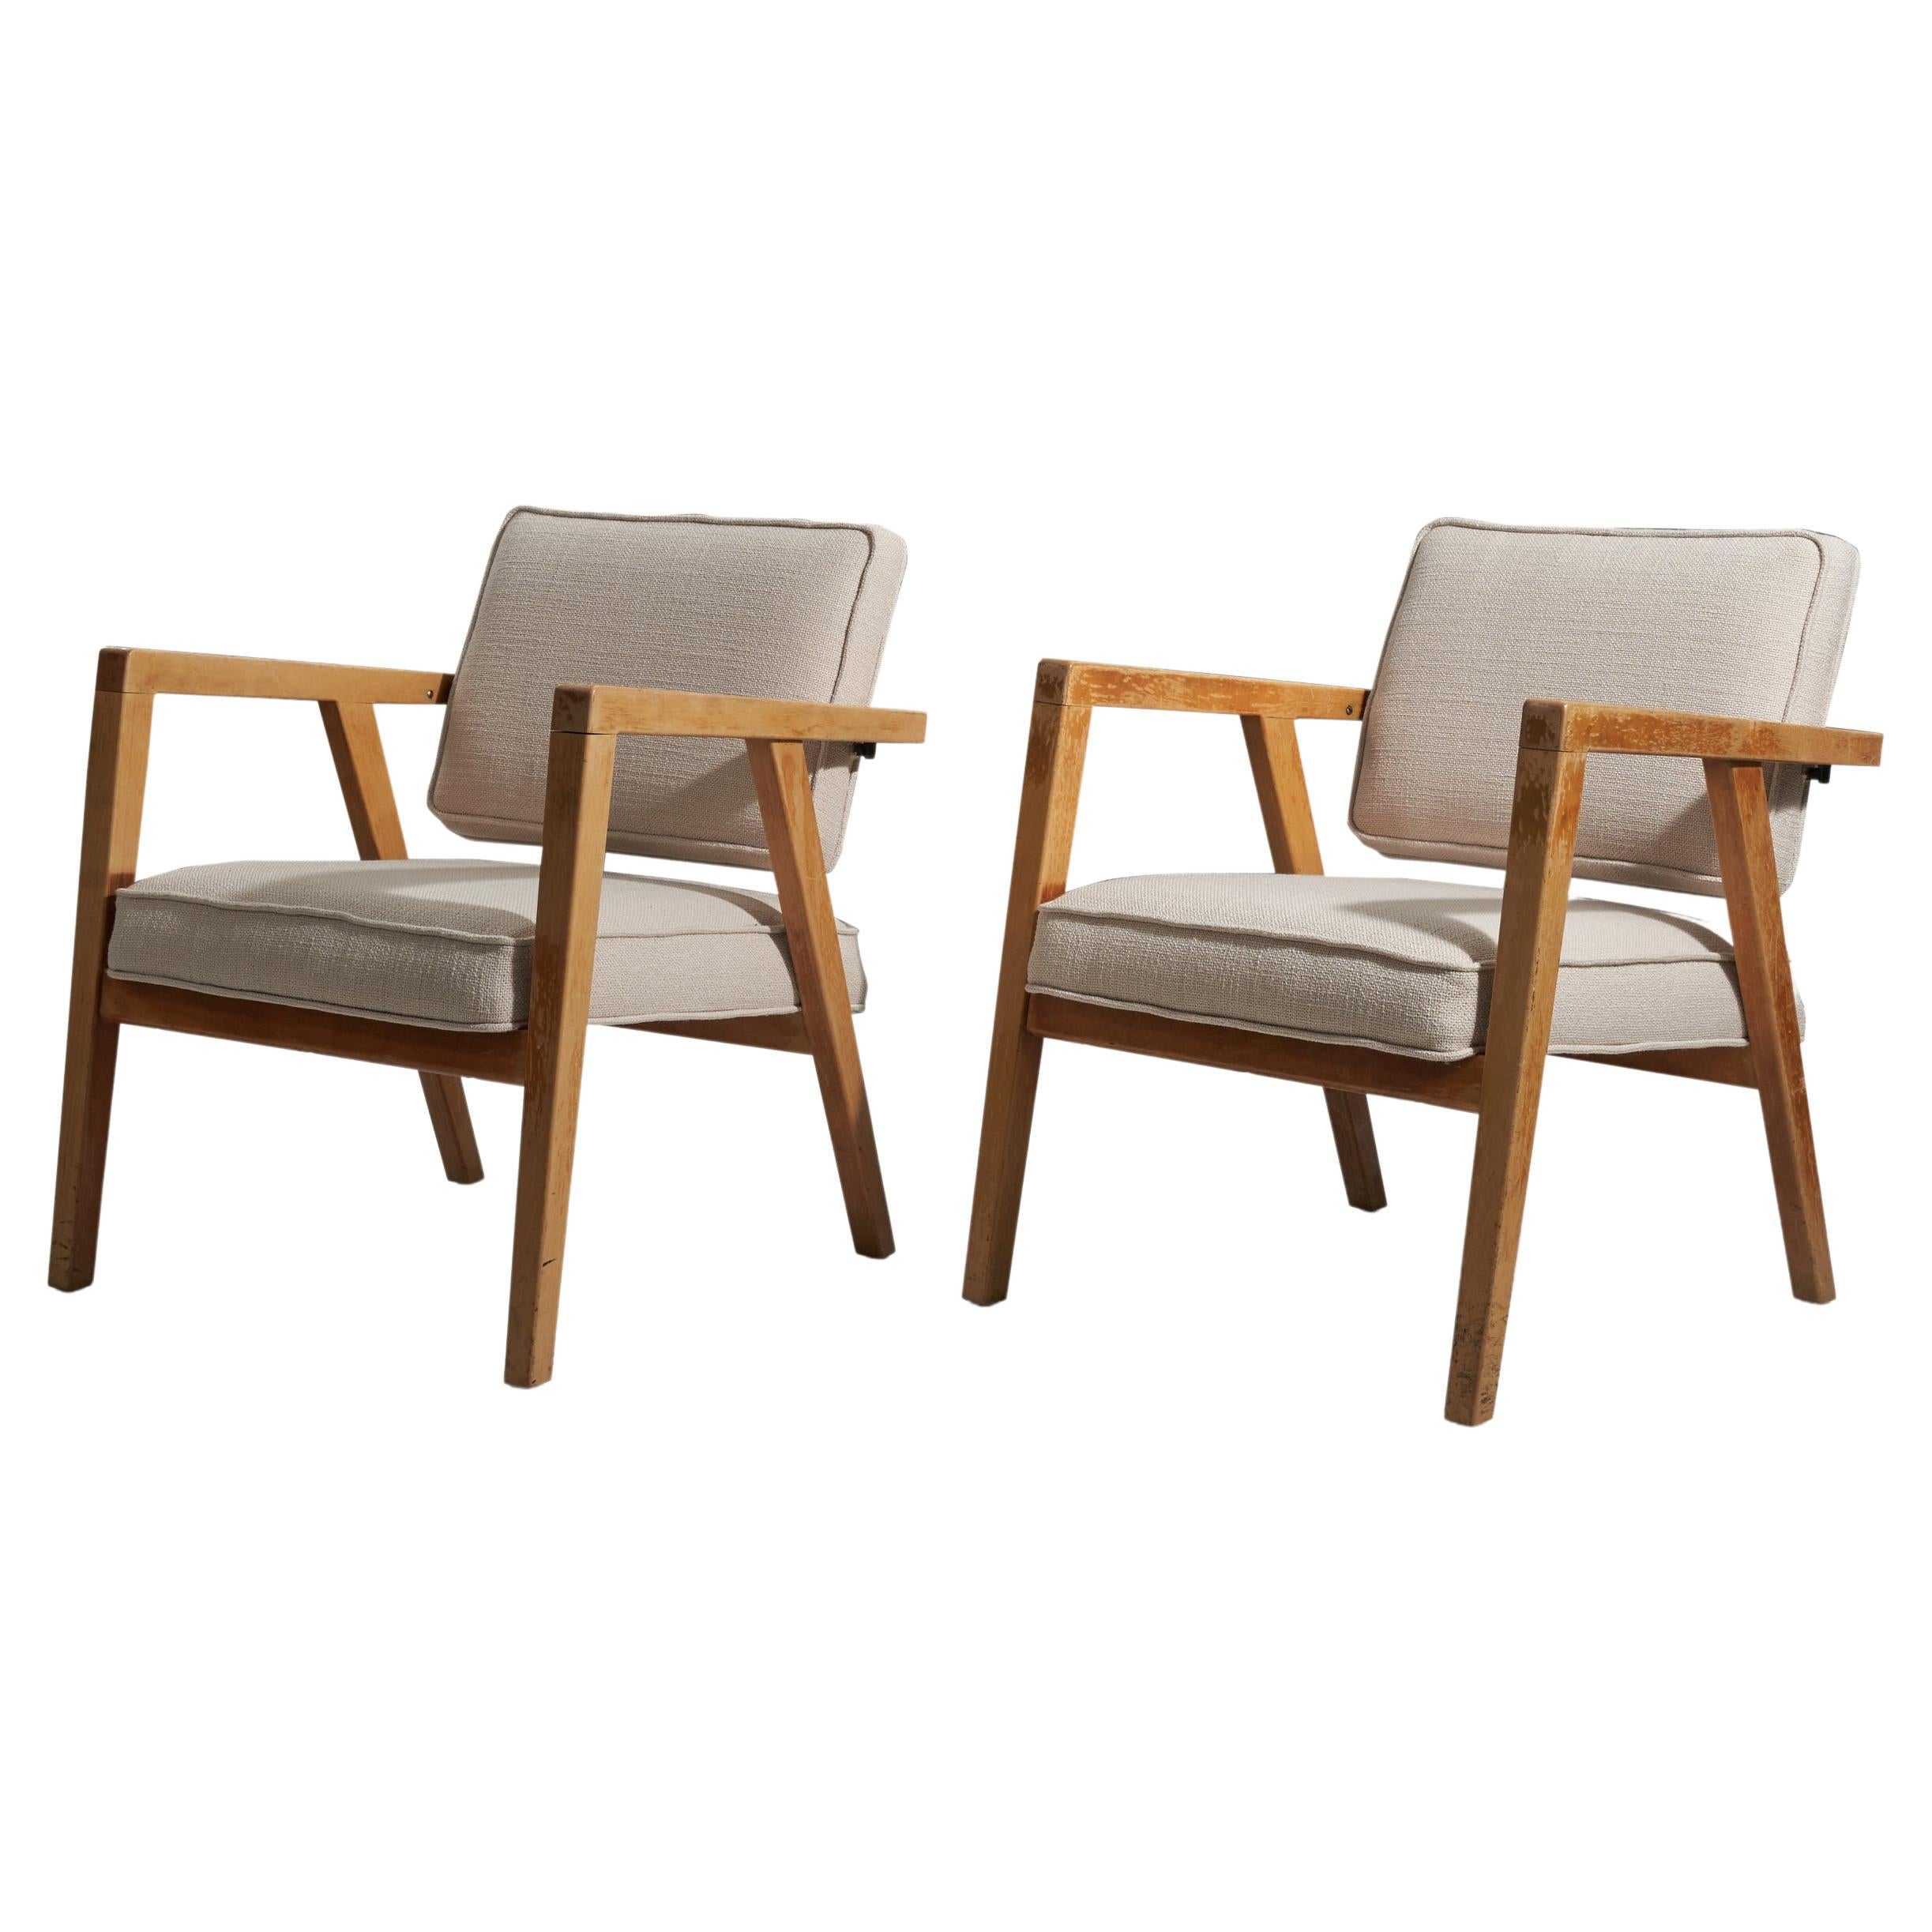 Details about   A Pair of Mid-Century Modern Arm Lounge Chairs 101-WH10 